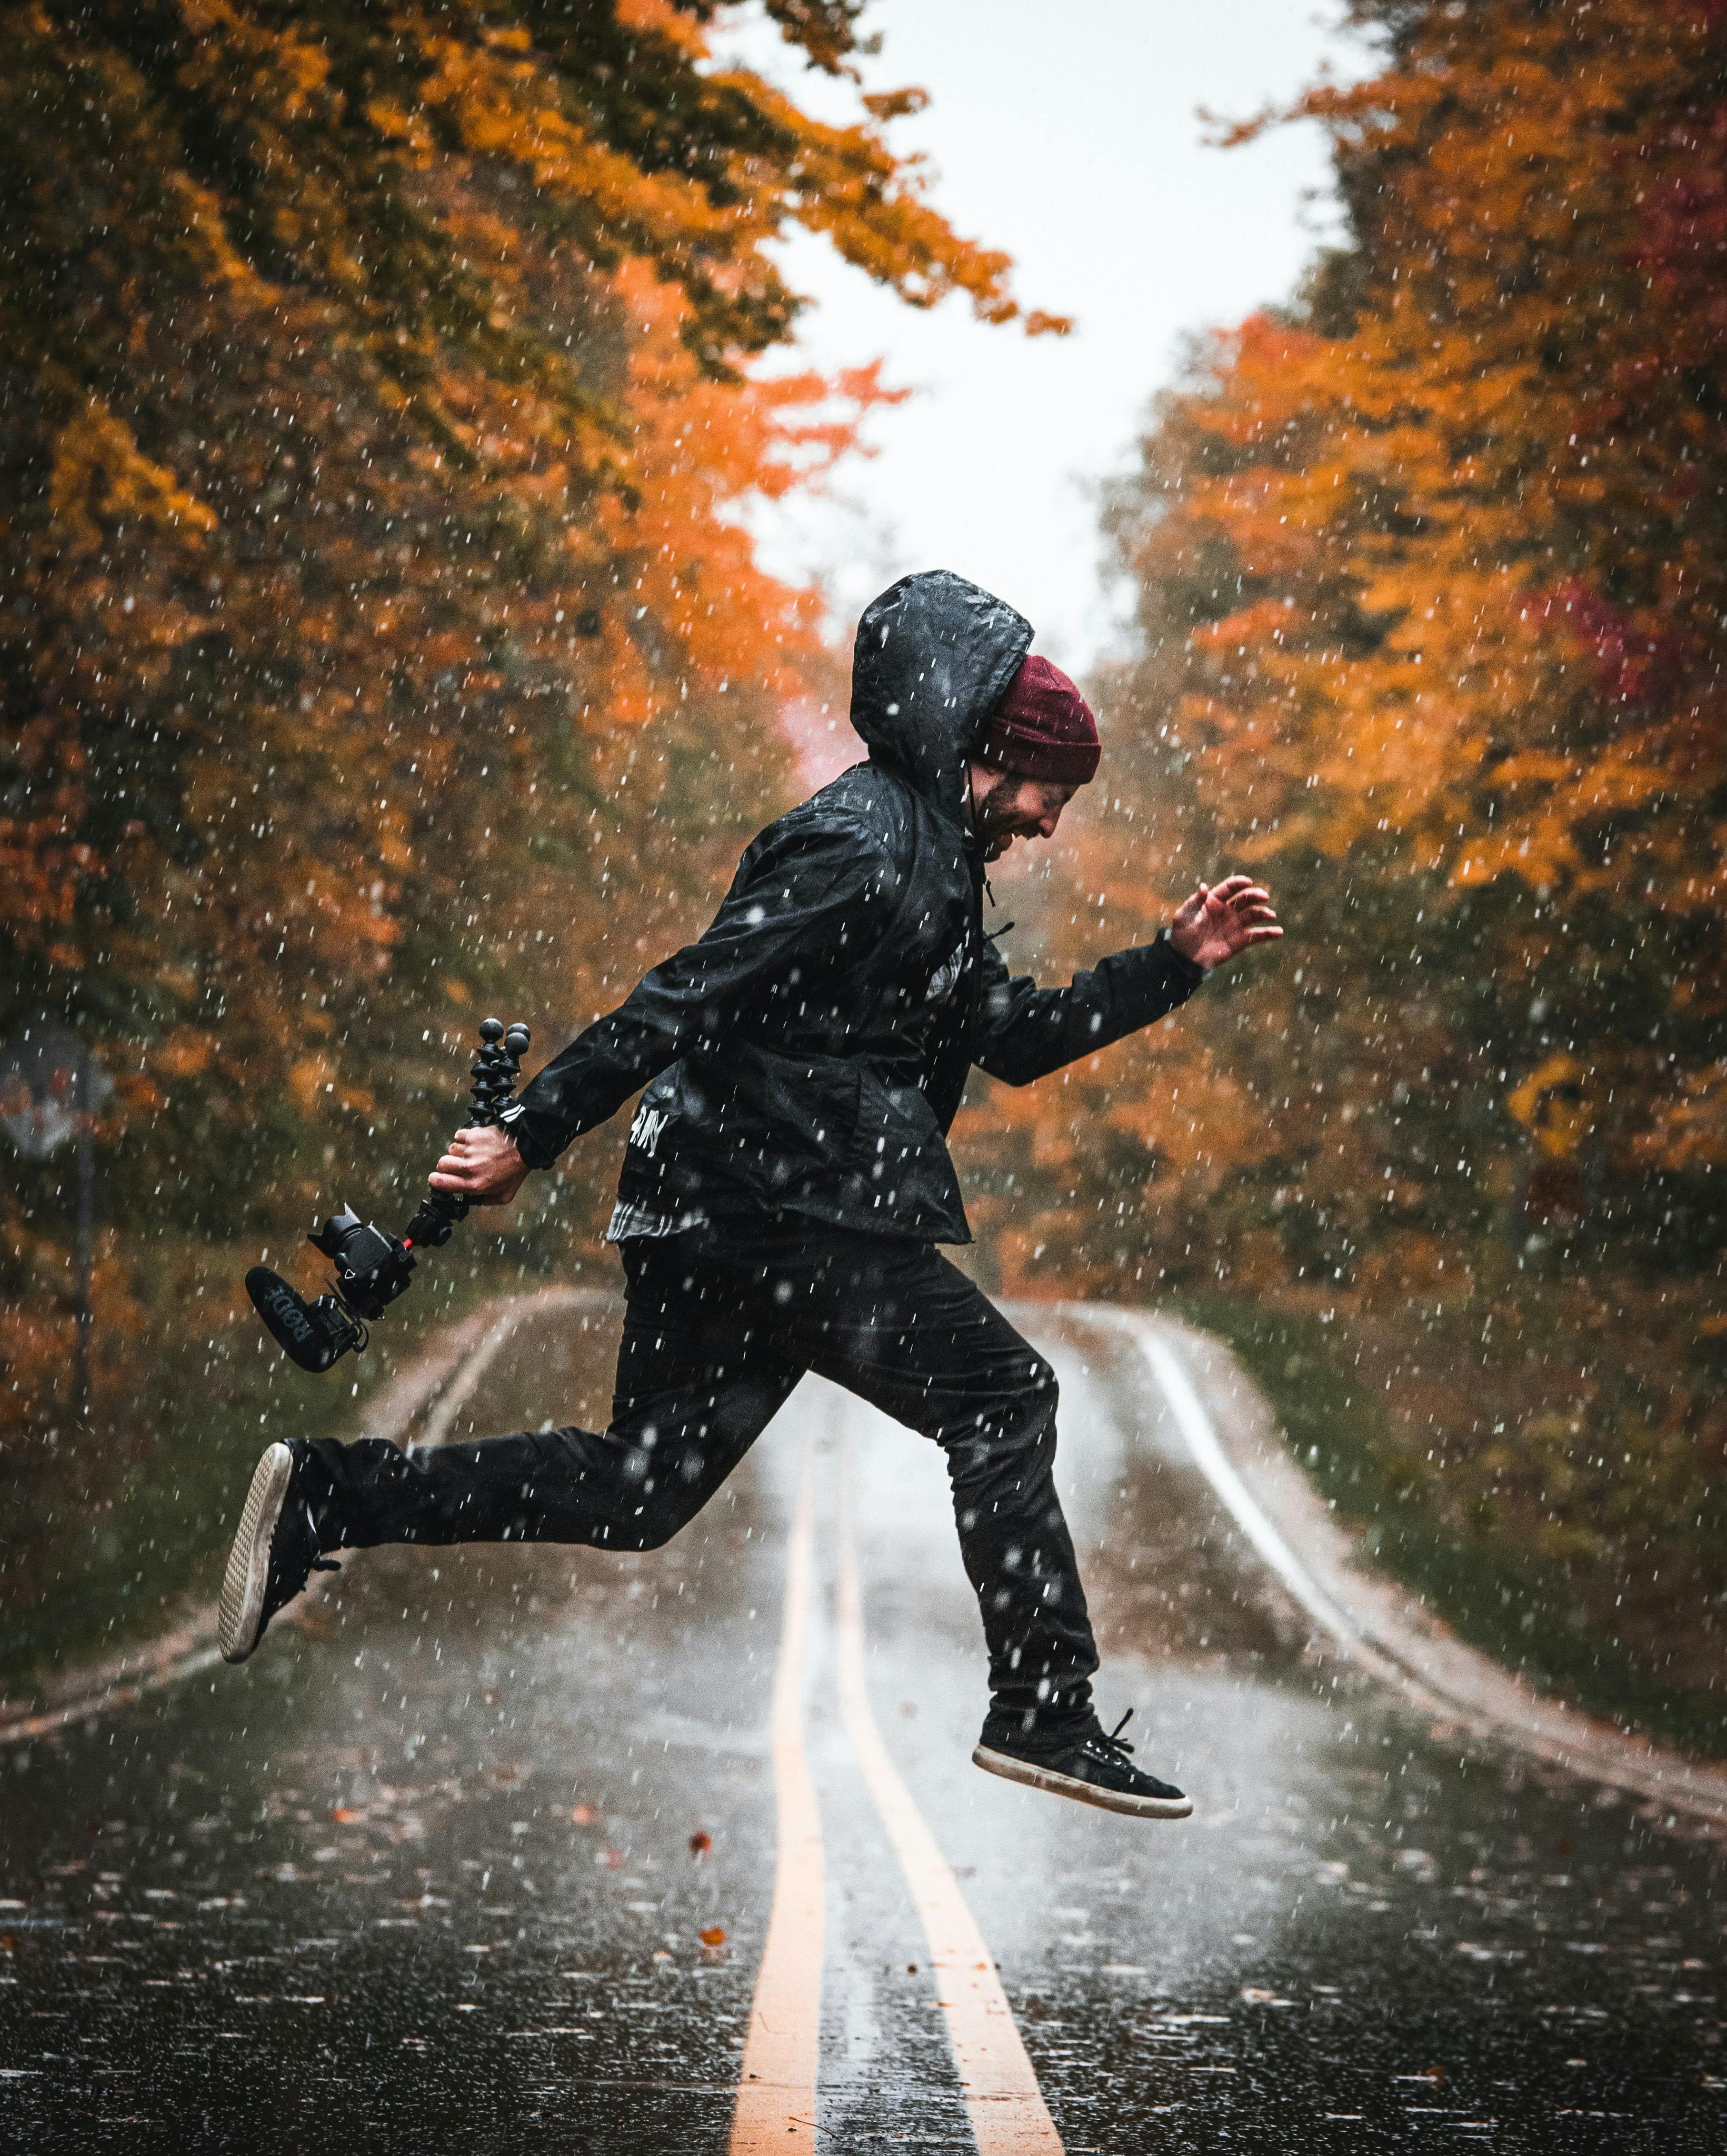 A man in a black hooded jacket jumping in the road in the rain with autumn foliage around him